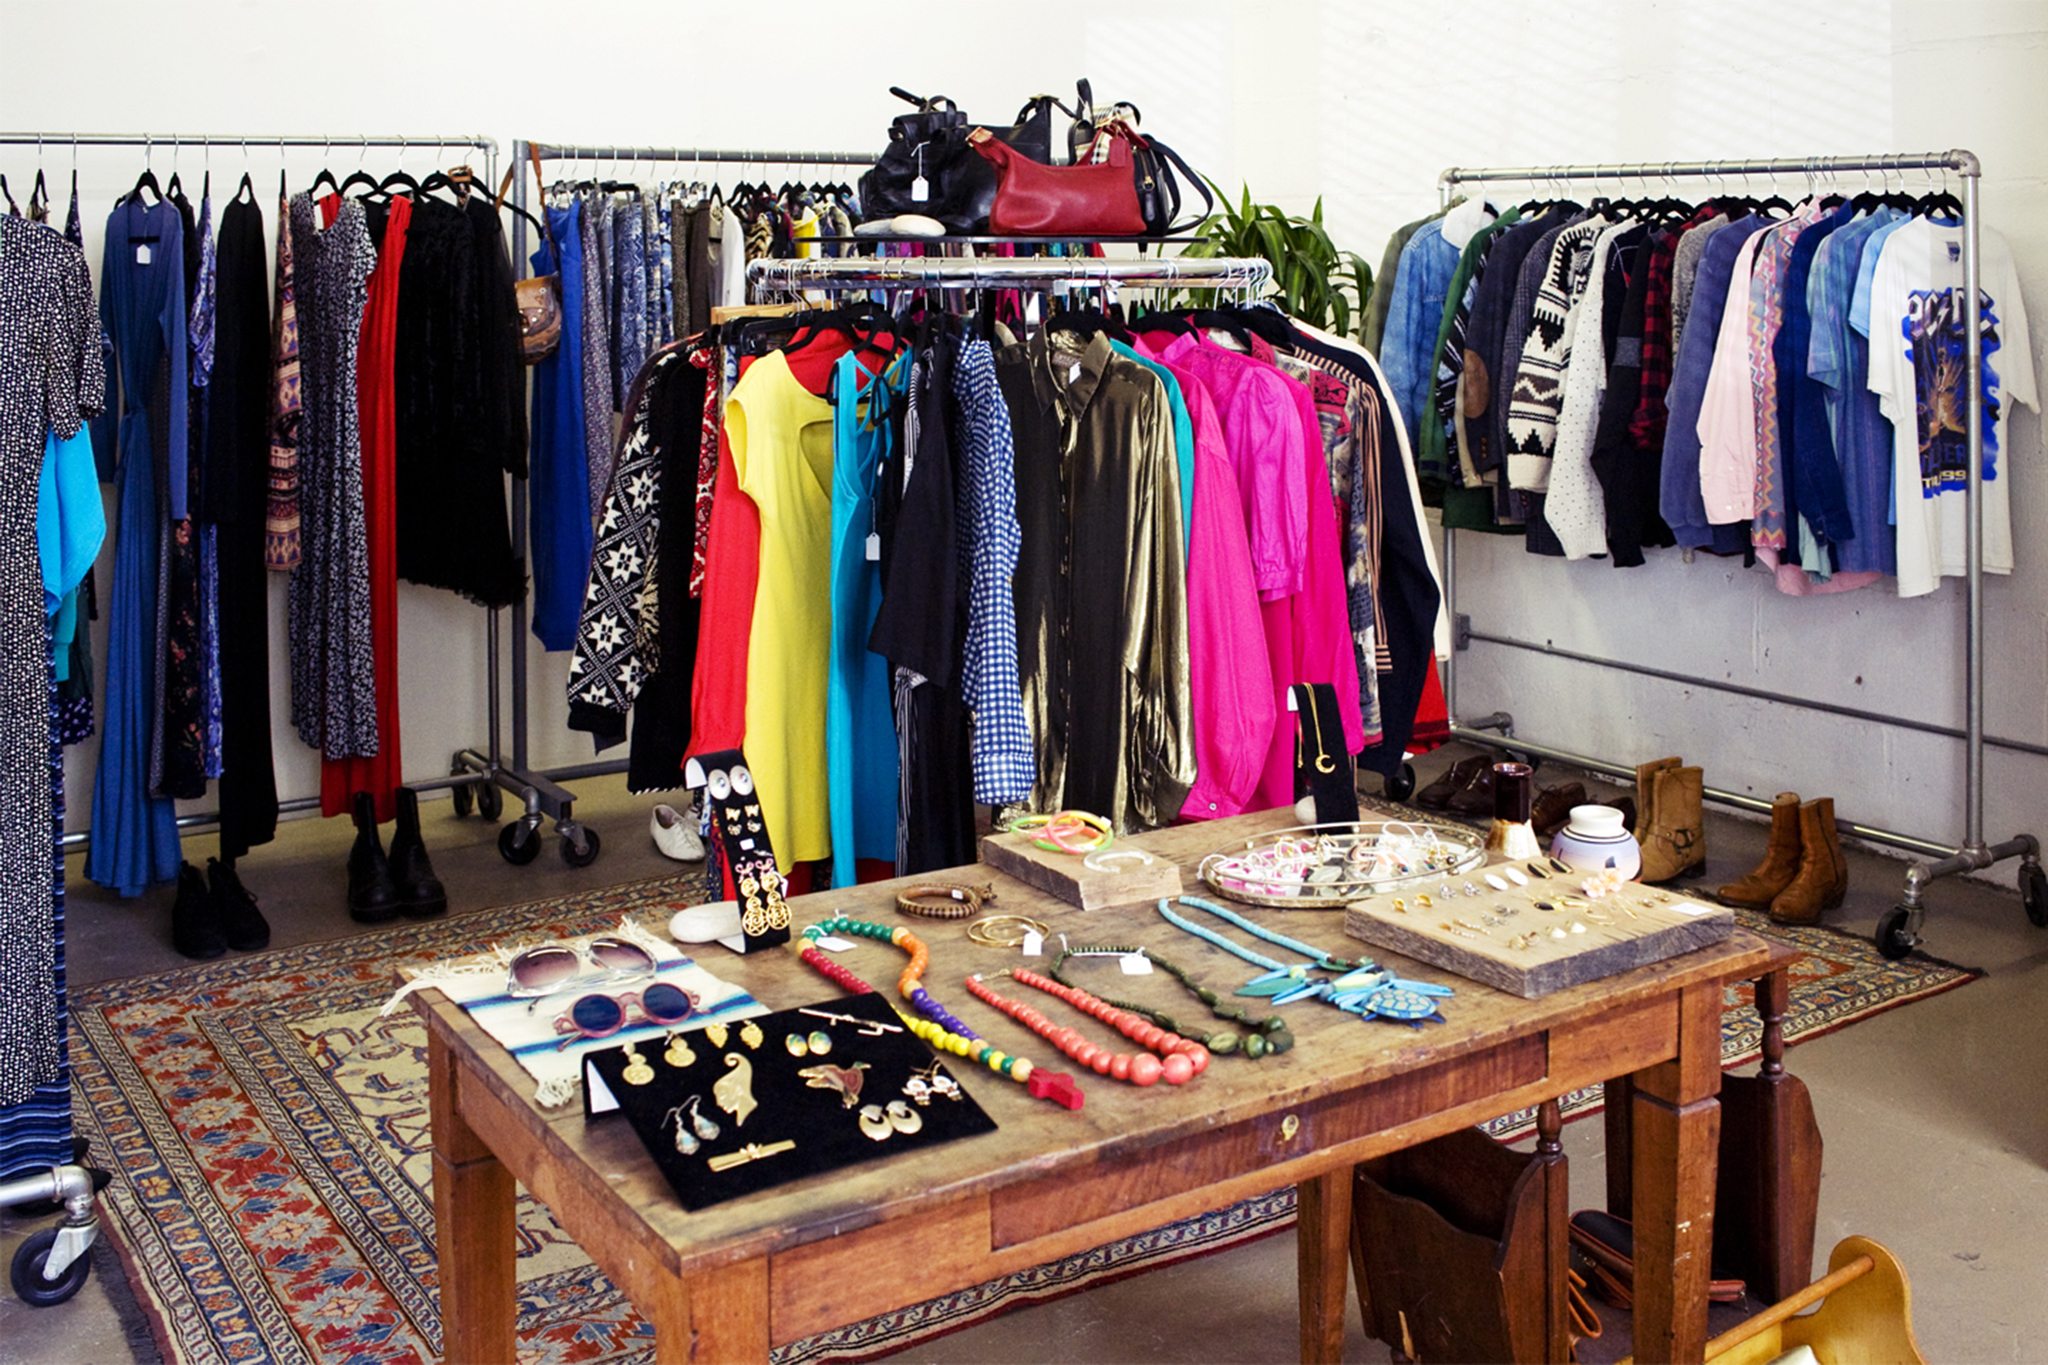 Where to go shopping in NYC from vintage boutiques to chains